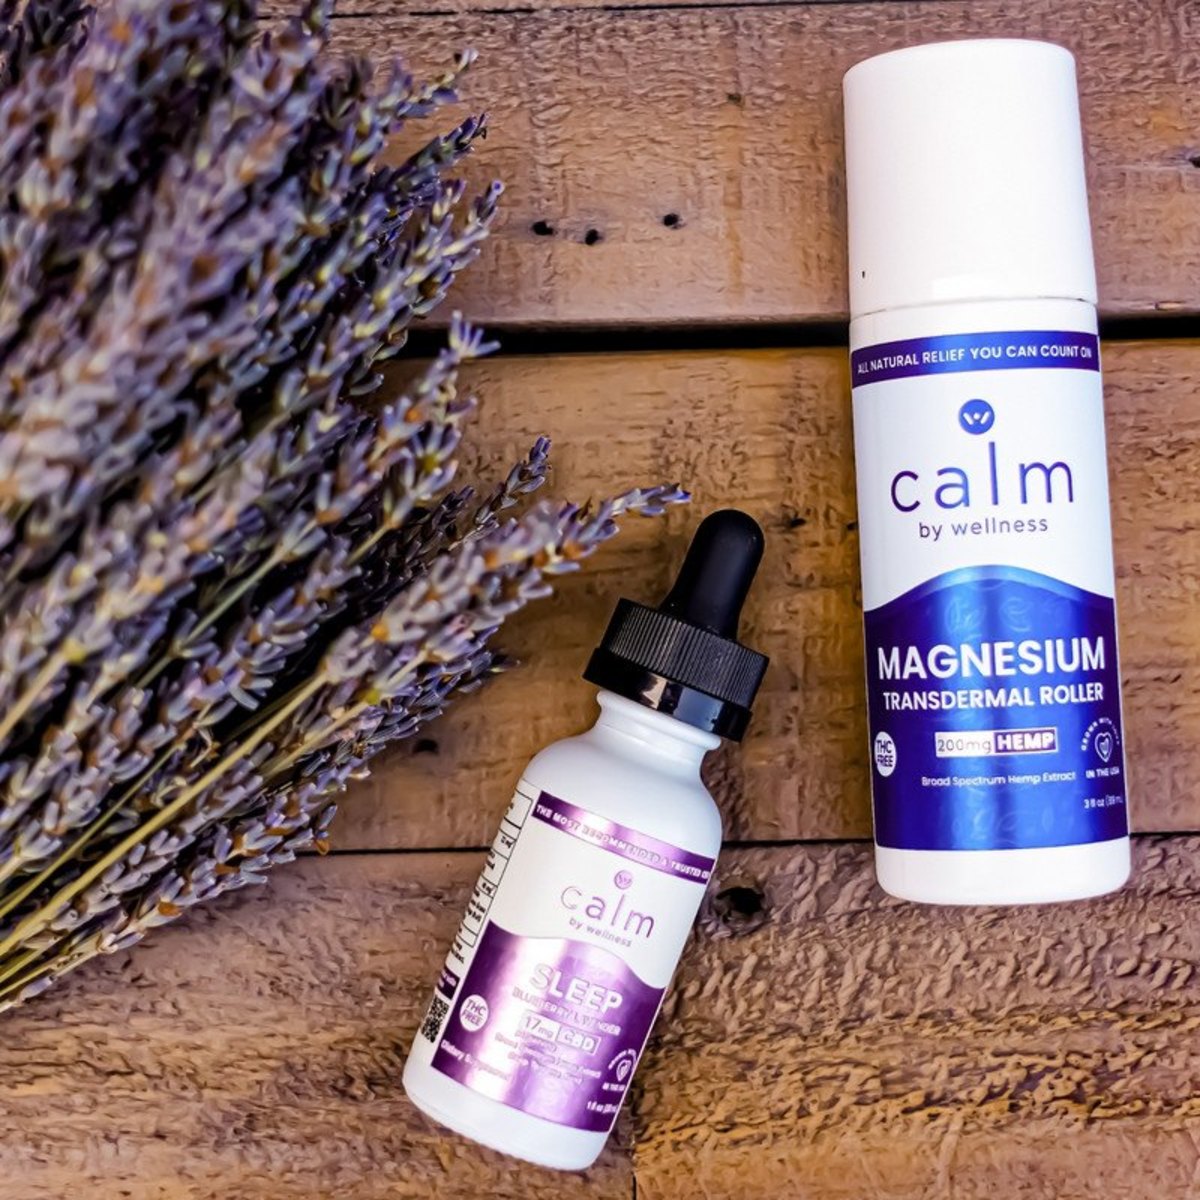 Calm by Wellness products.